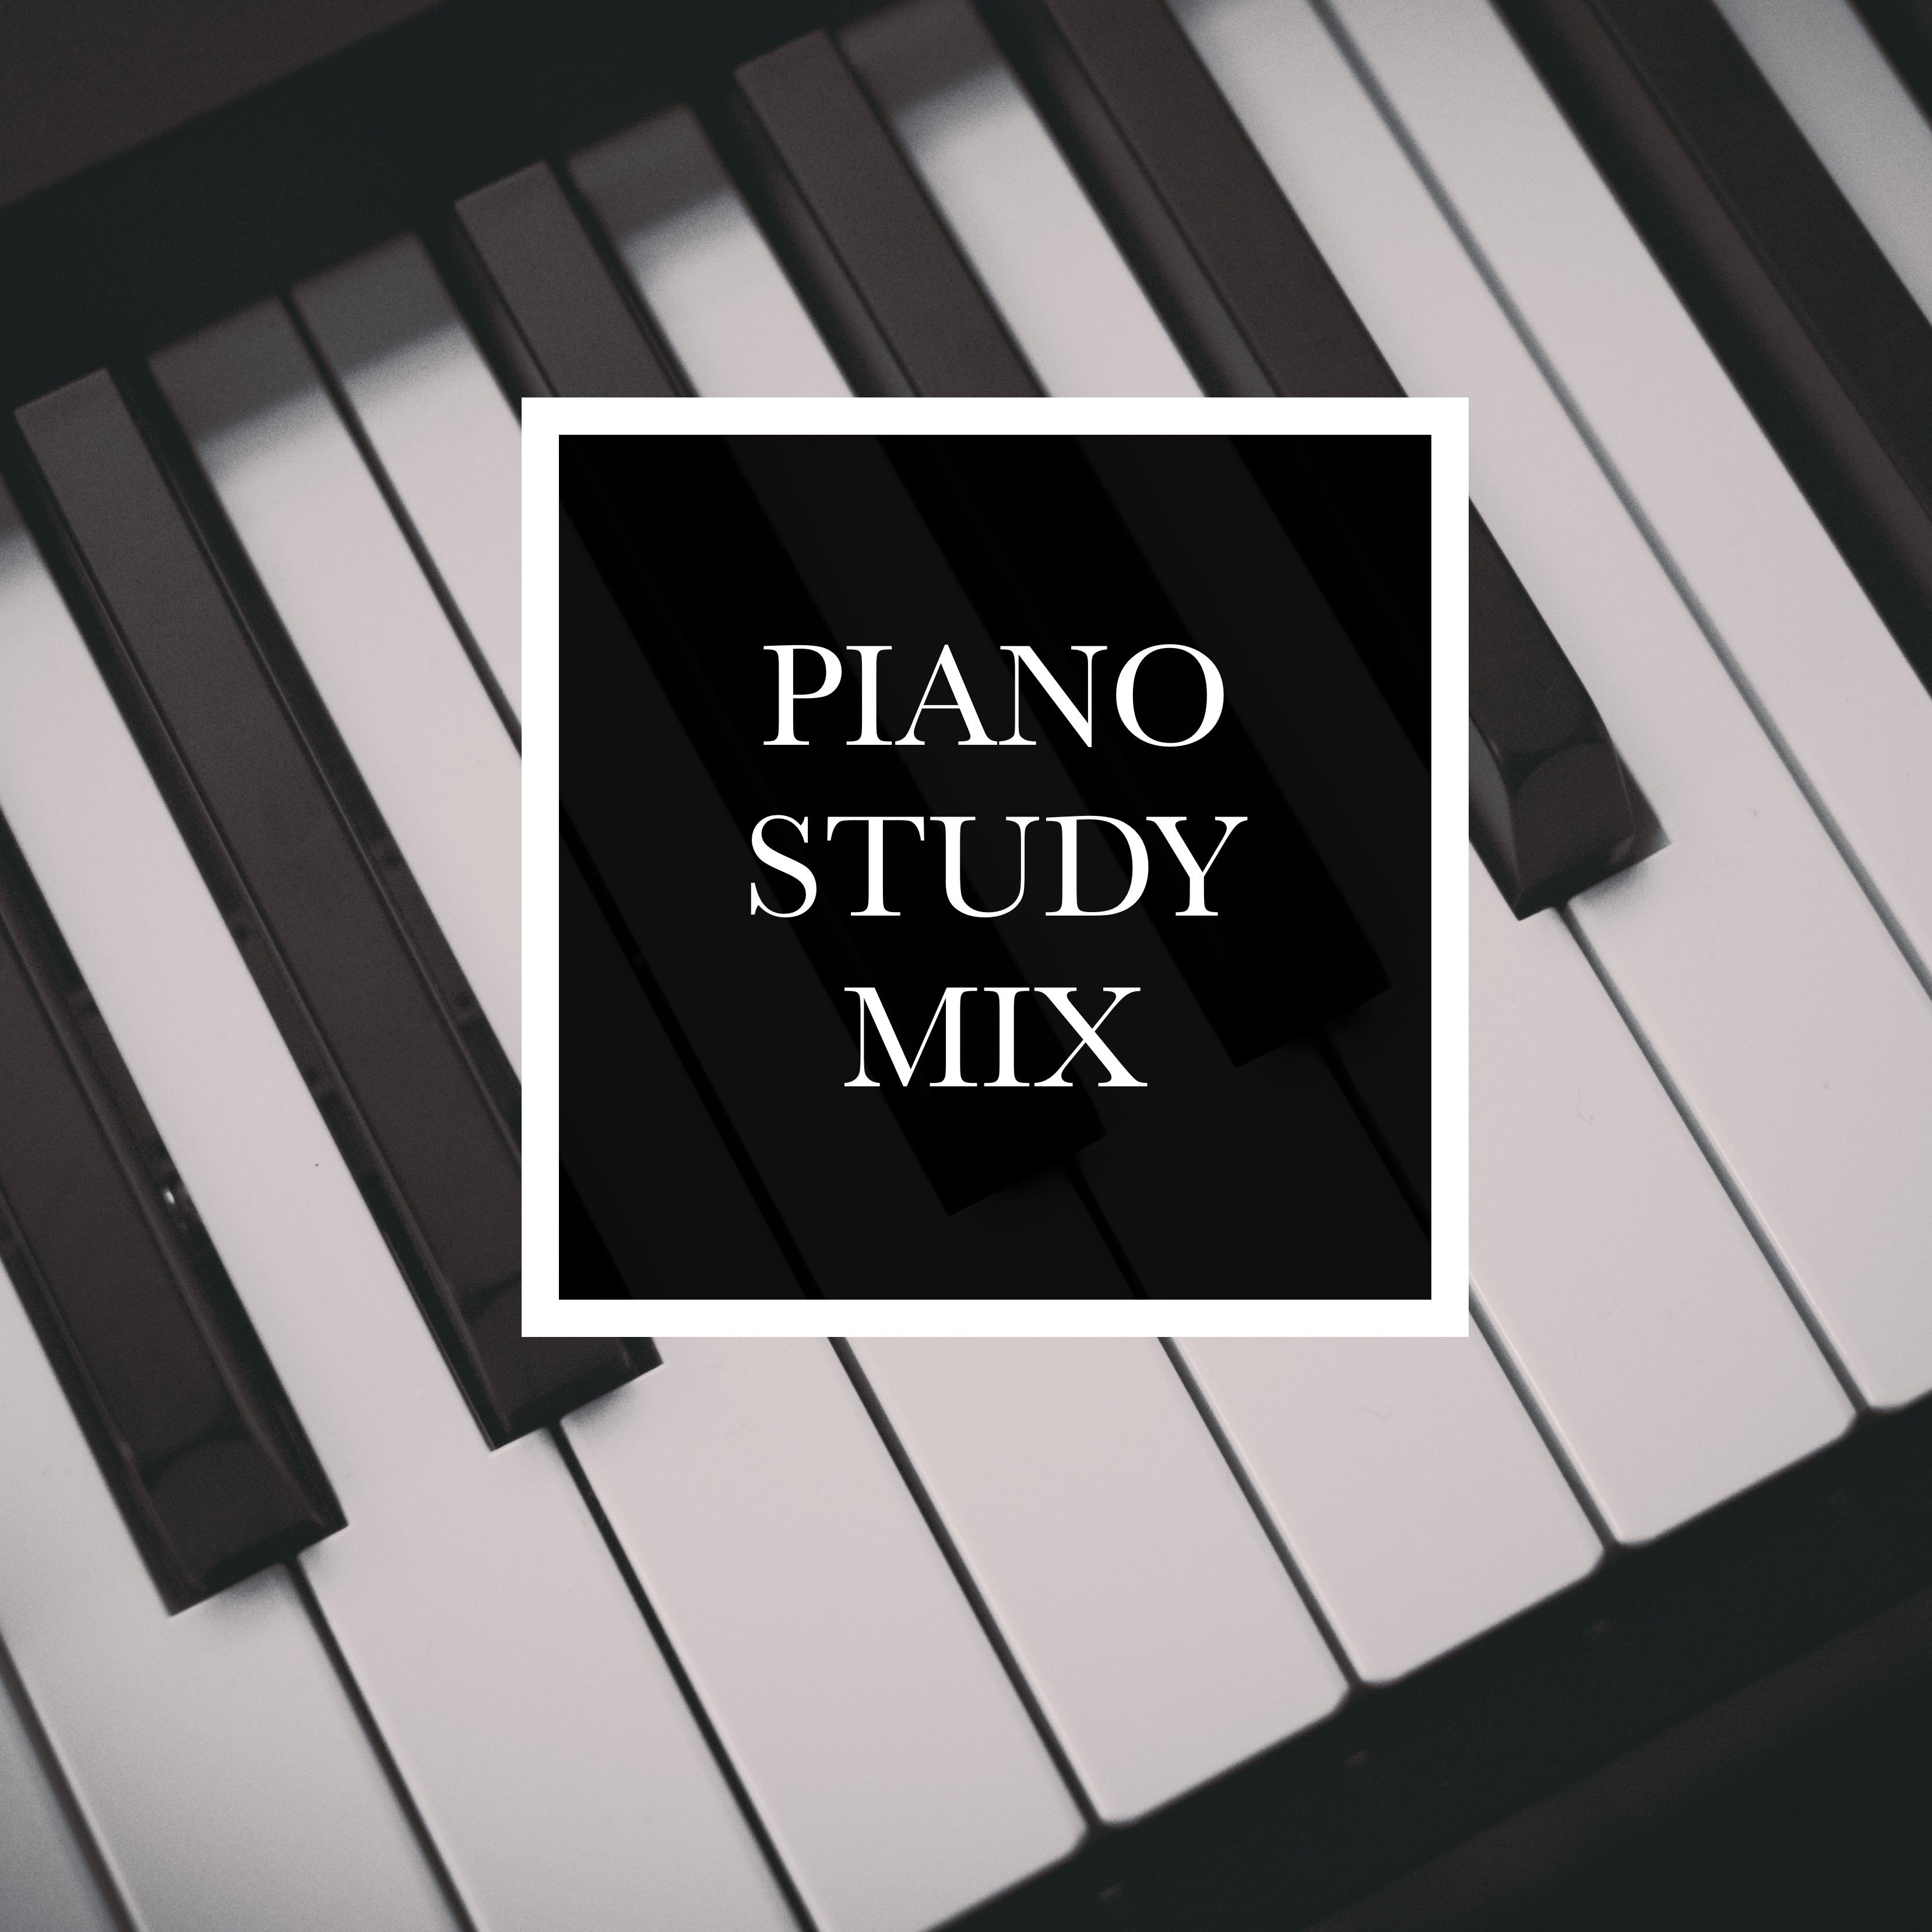 Piano Study Music - Sounds for Deep Study Focus and Relaxation